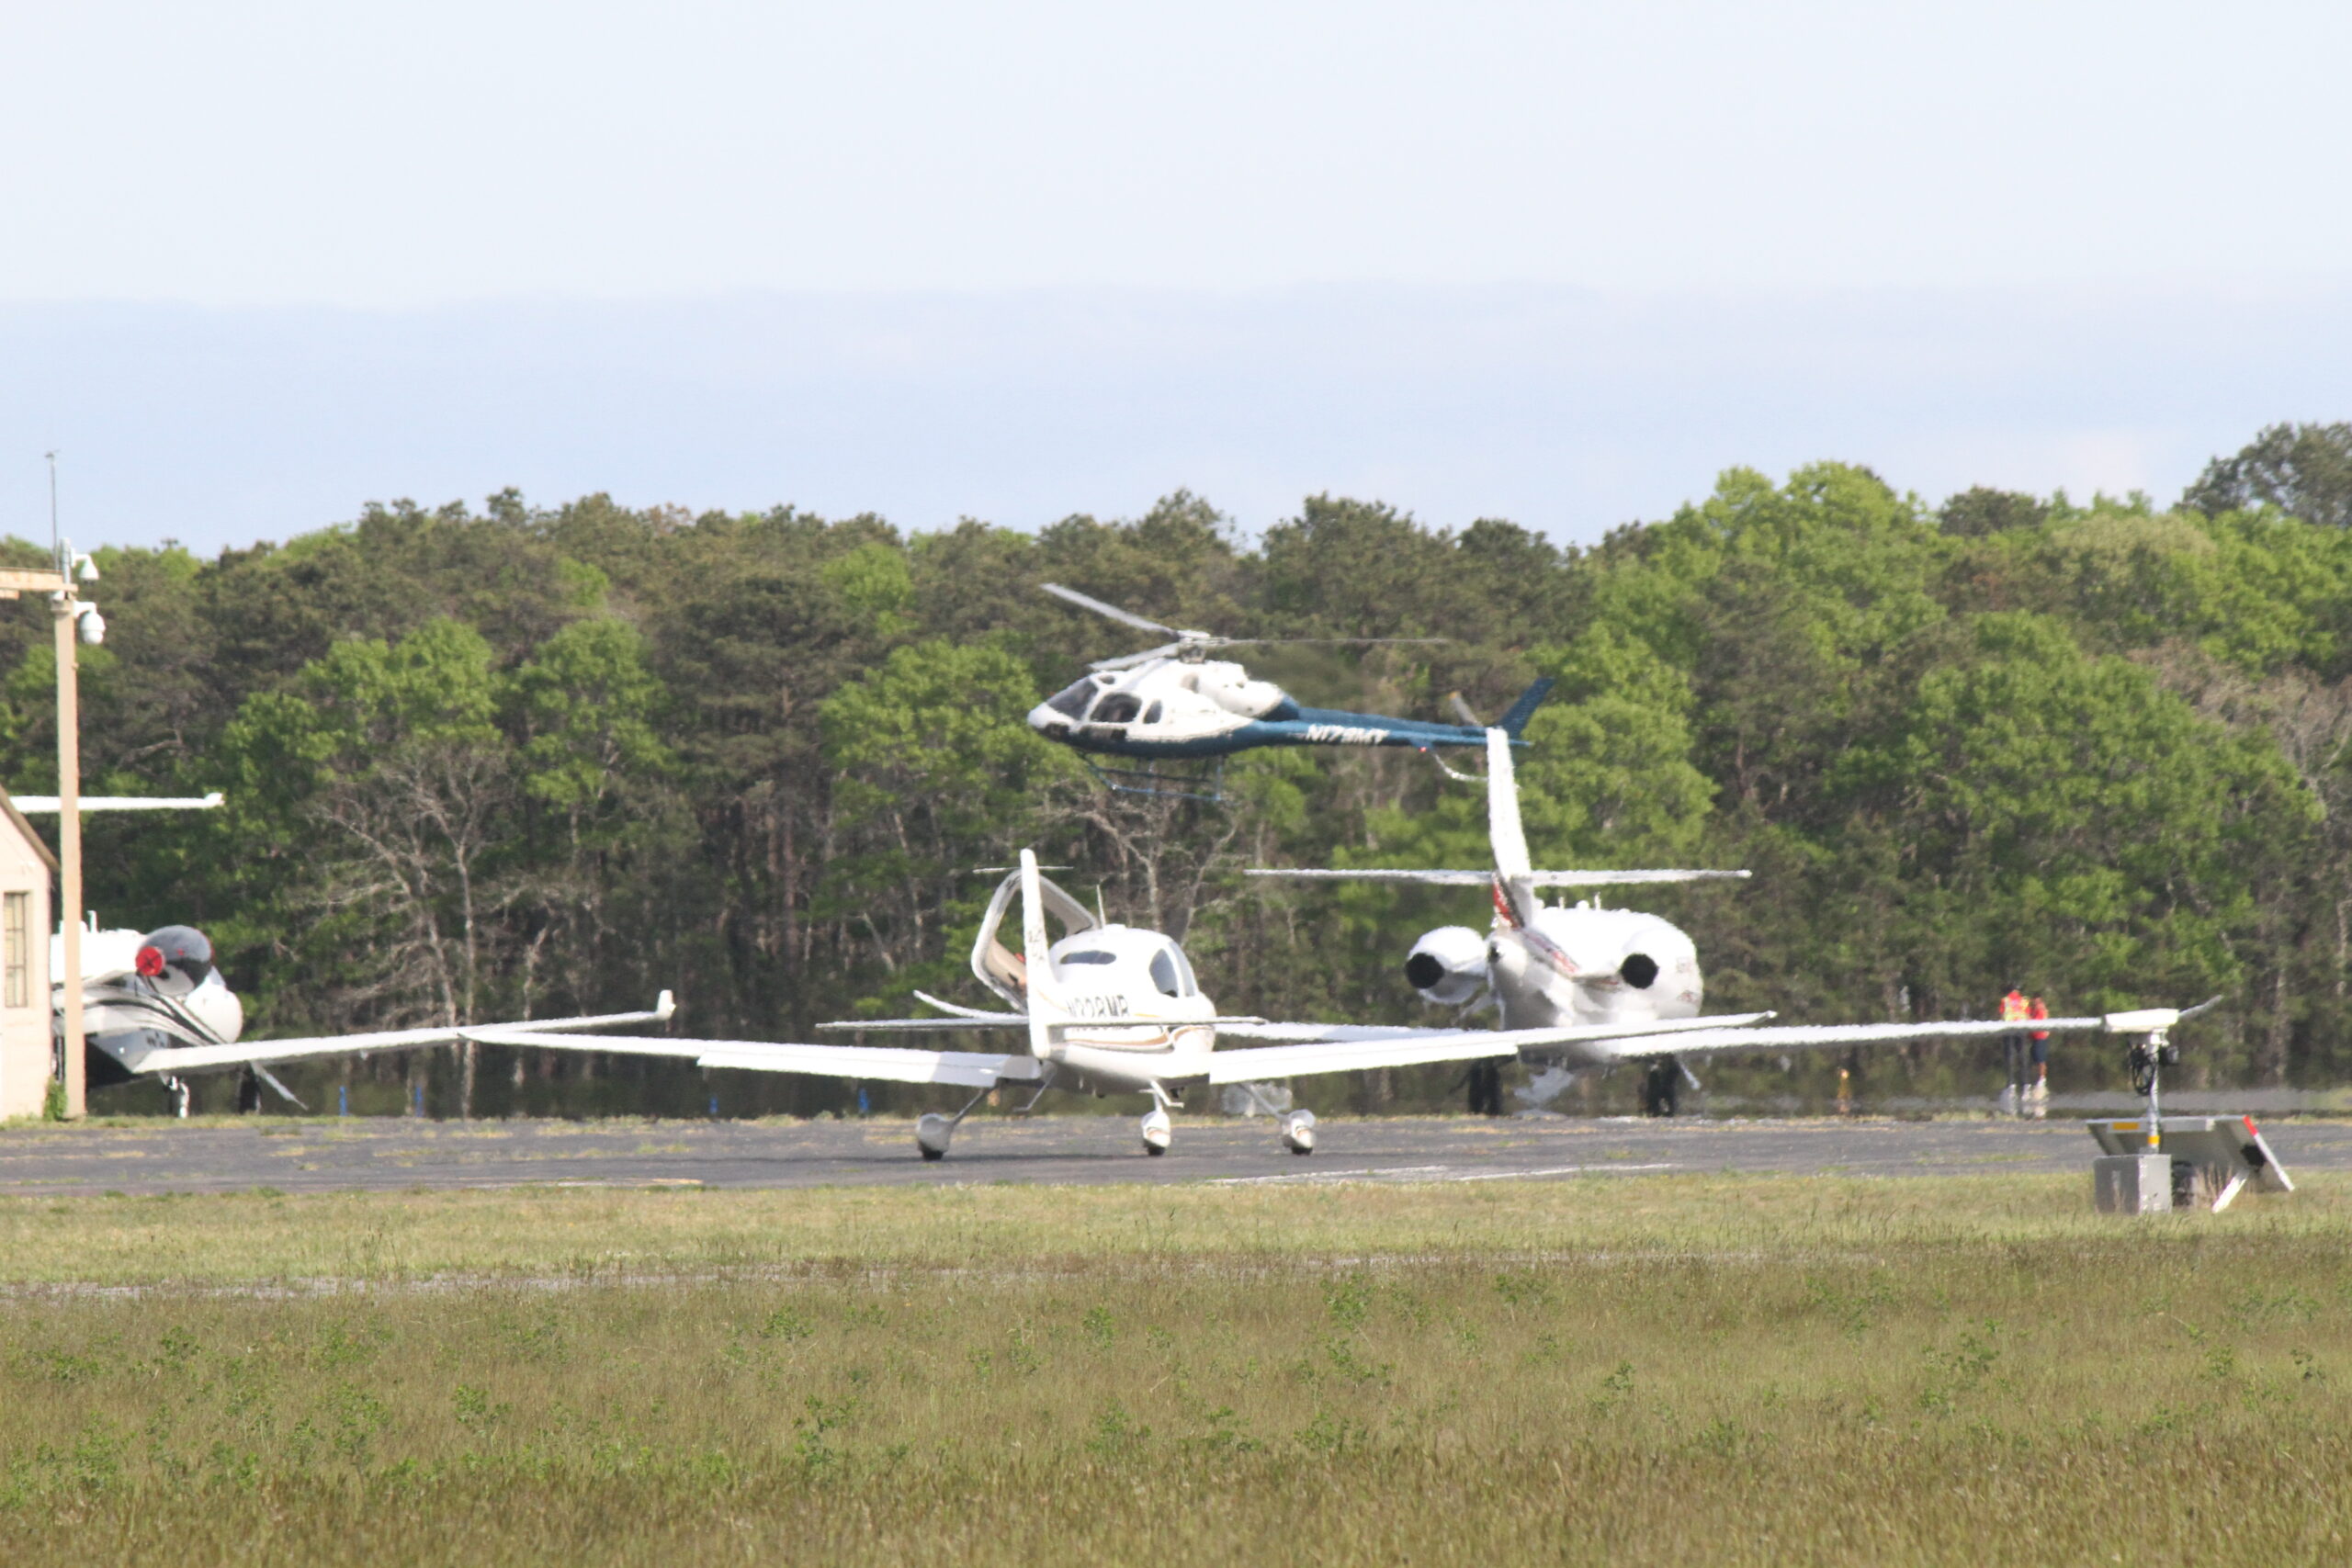 Fewer helicopter flights accounted for about half of the total drop in traffic at East Hampton Airport this summer, though traffic by jets and small propeller planes was also down.